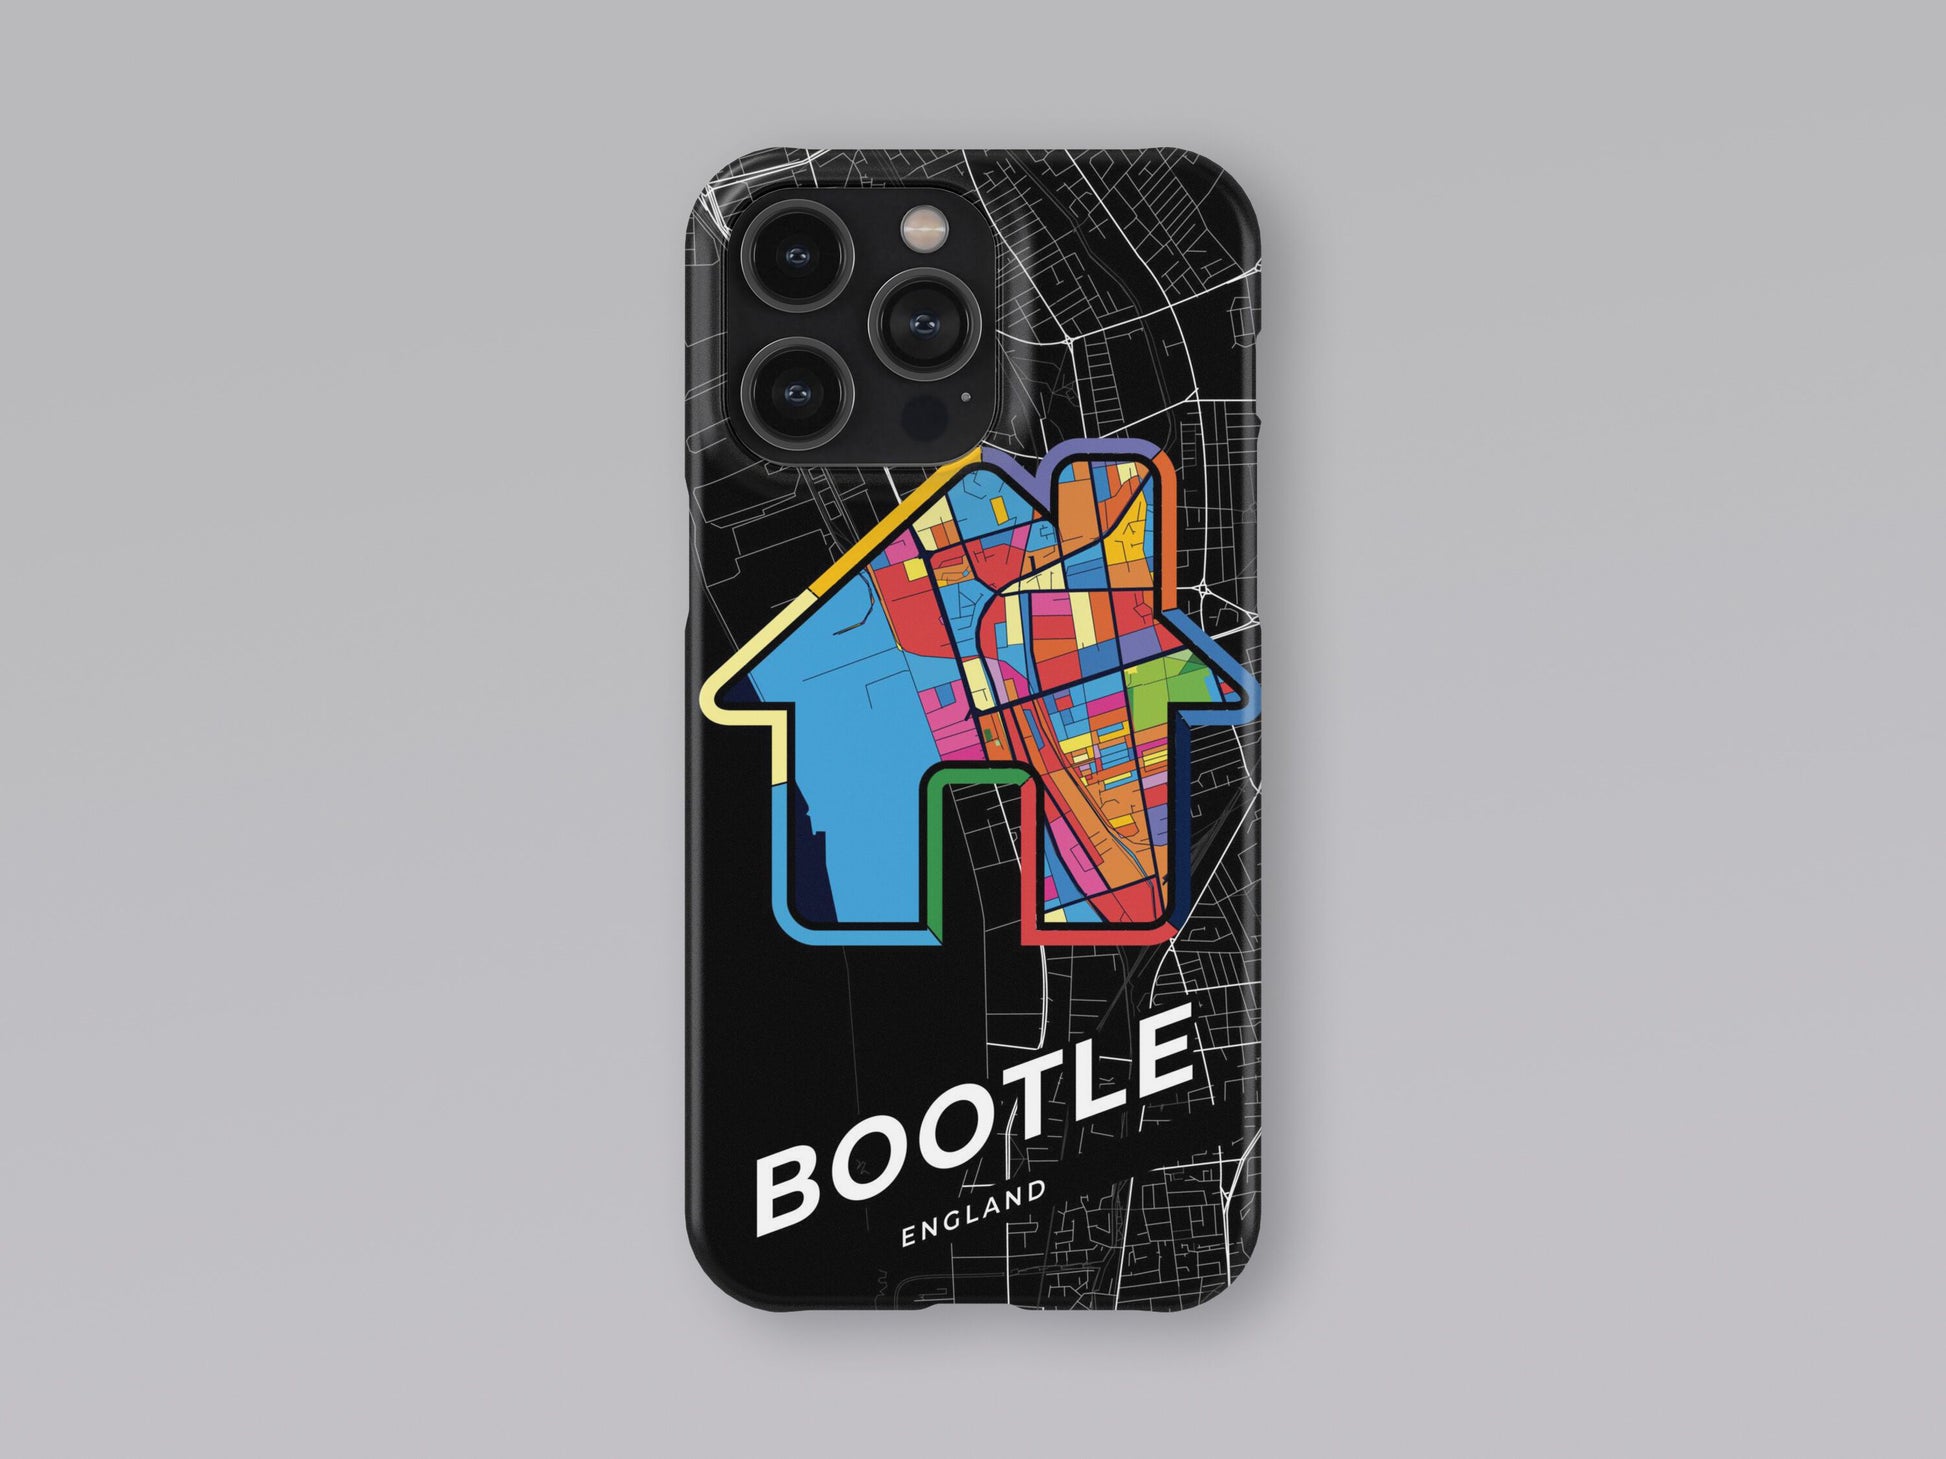 Bootle England slim phone case with colorful icon. Birthday, wedding or housewarming gift. Couple match cases. 3